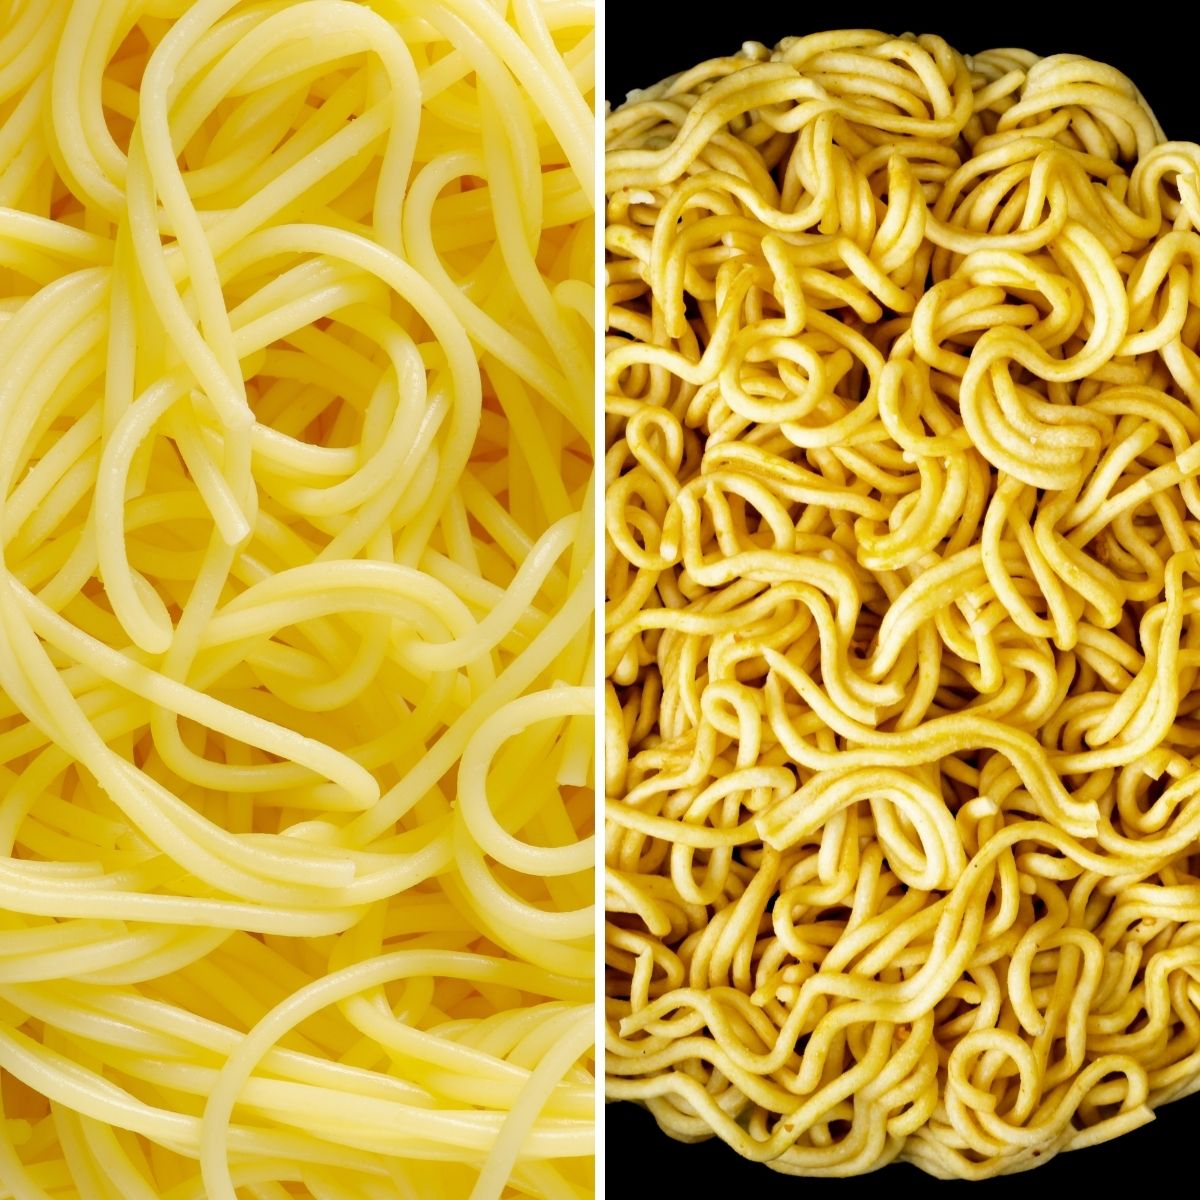 2 photo collage with yellow noodles. Spaghetti is on the left while egg noodles are on the right